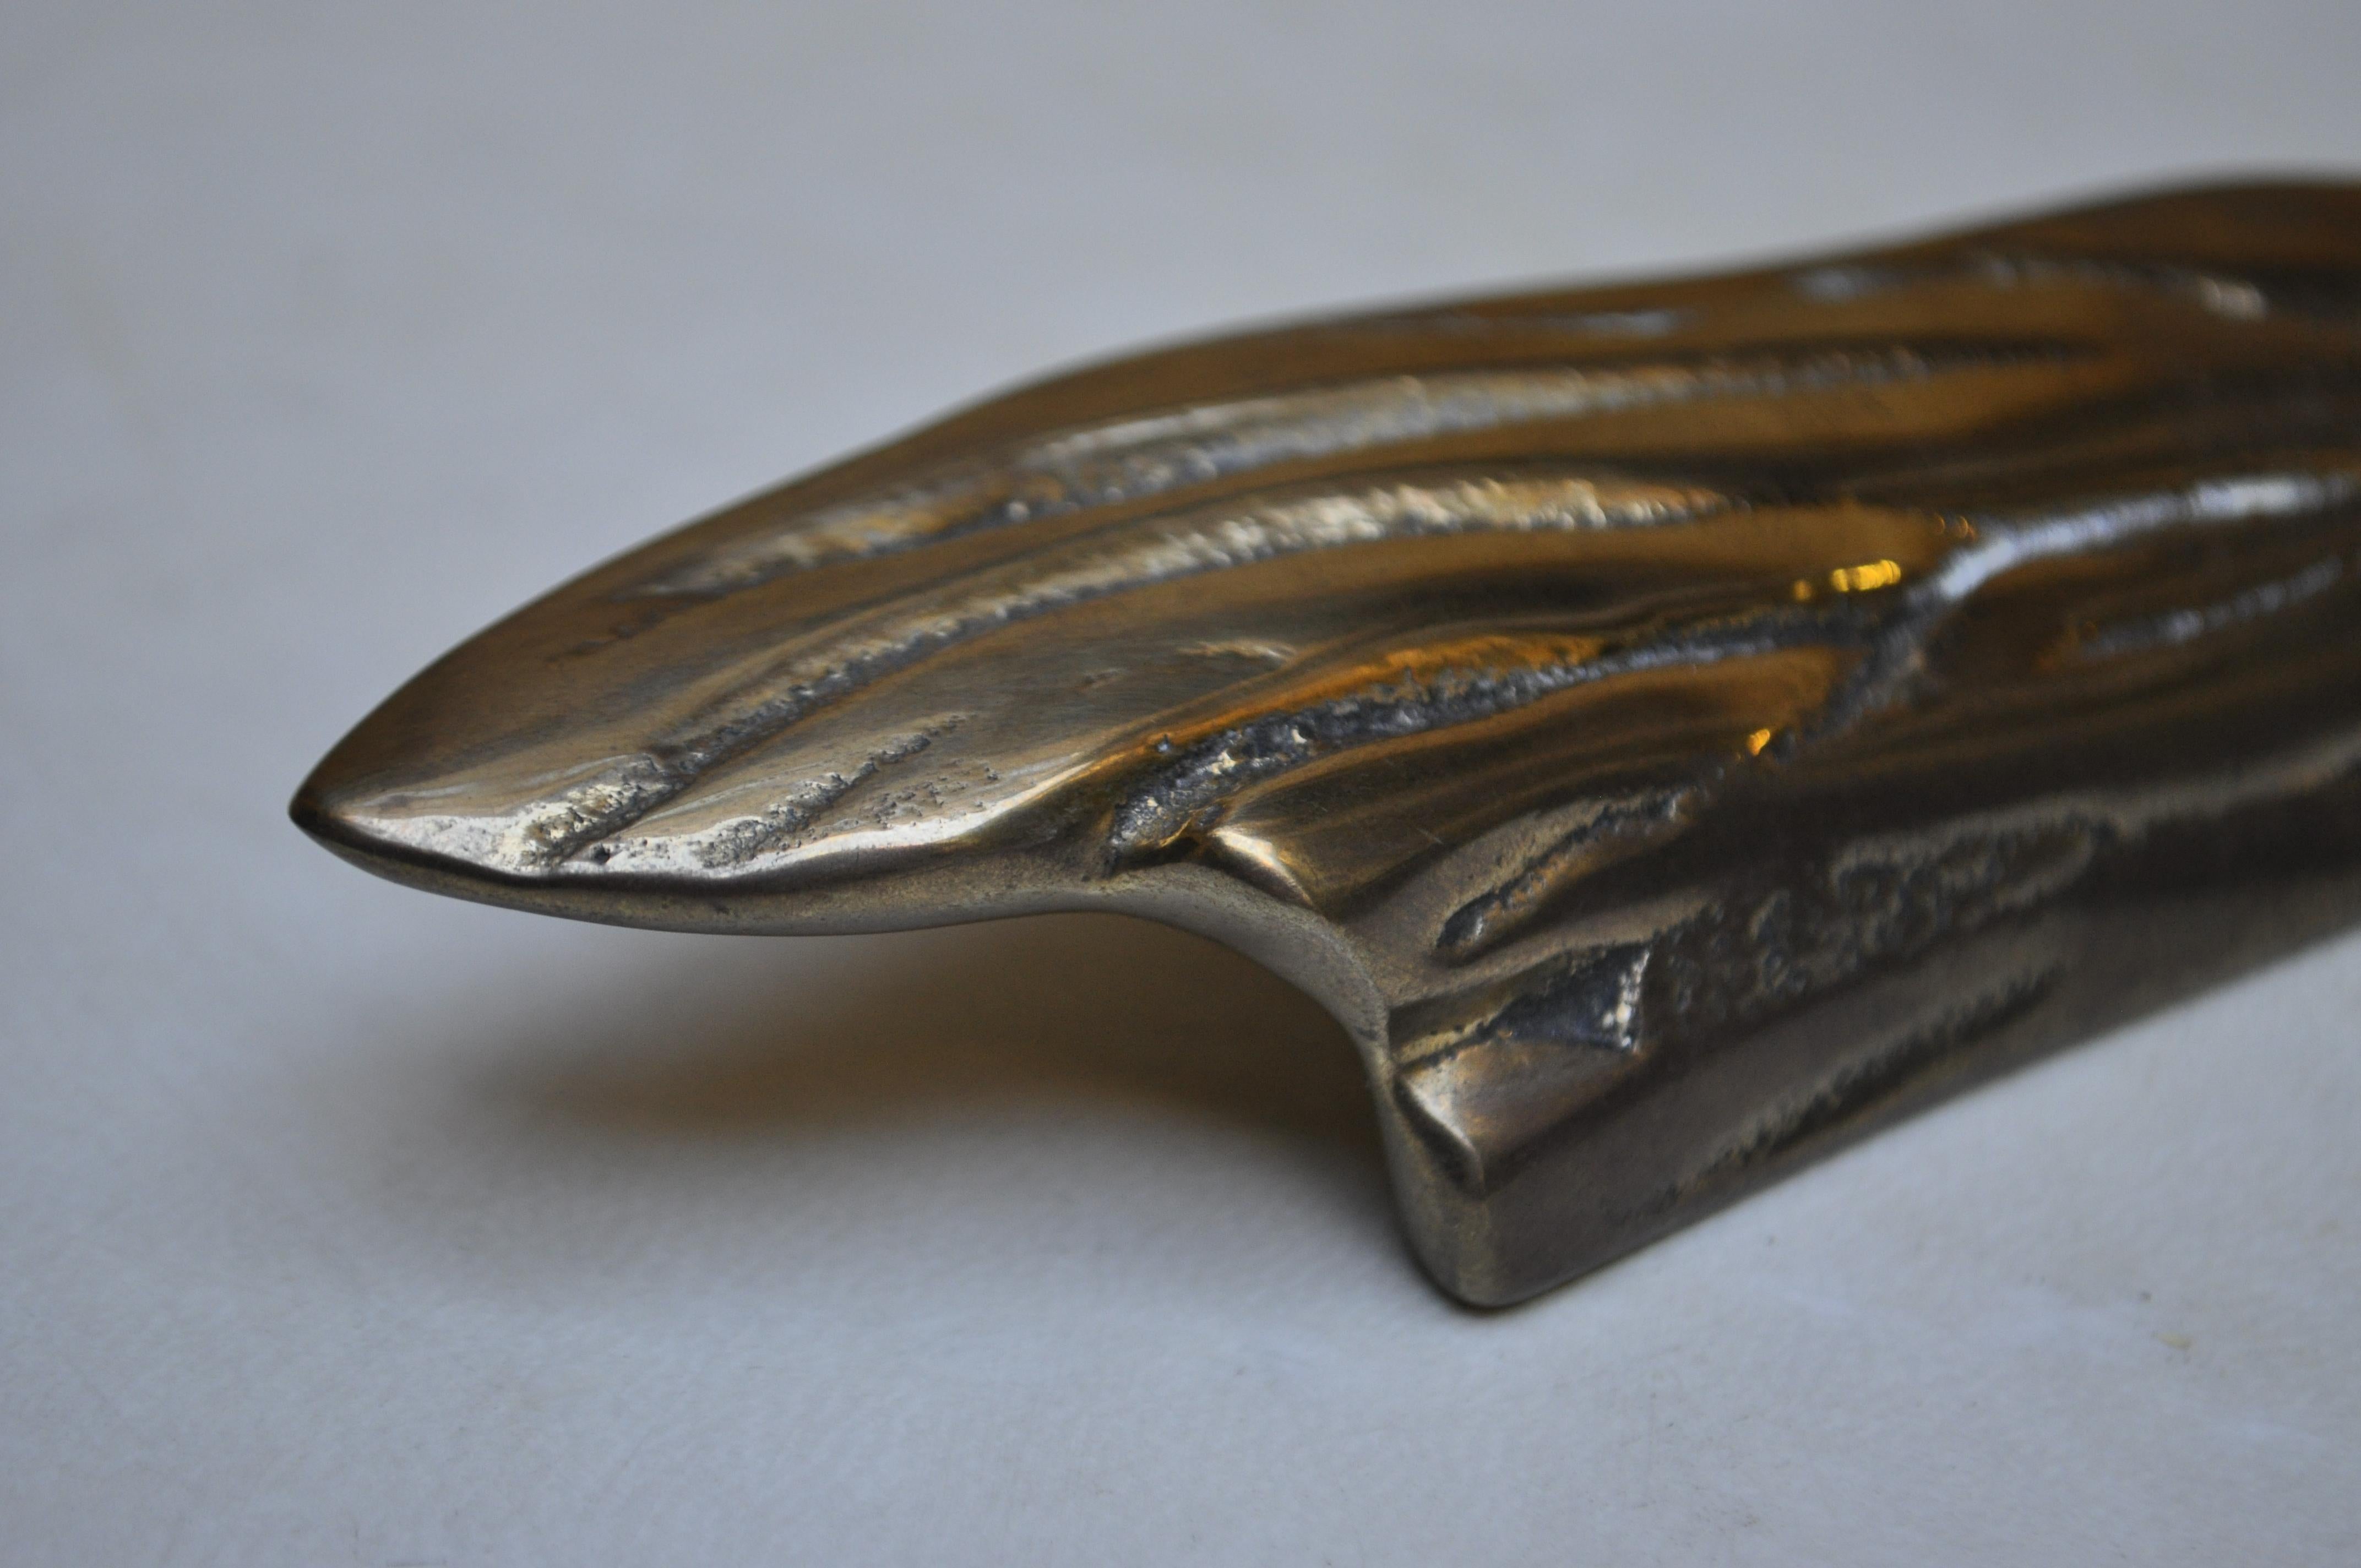 Small shiny sculpture that evokes vegetal and marine forms, smooth to the touch and made in bronze casting, according to the ancient technique of French sand molds. This handles are a sculptural touch for closets, doors or drawers.